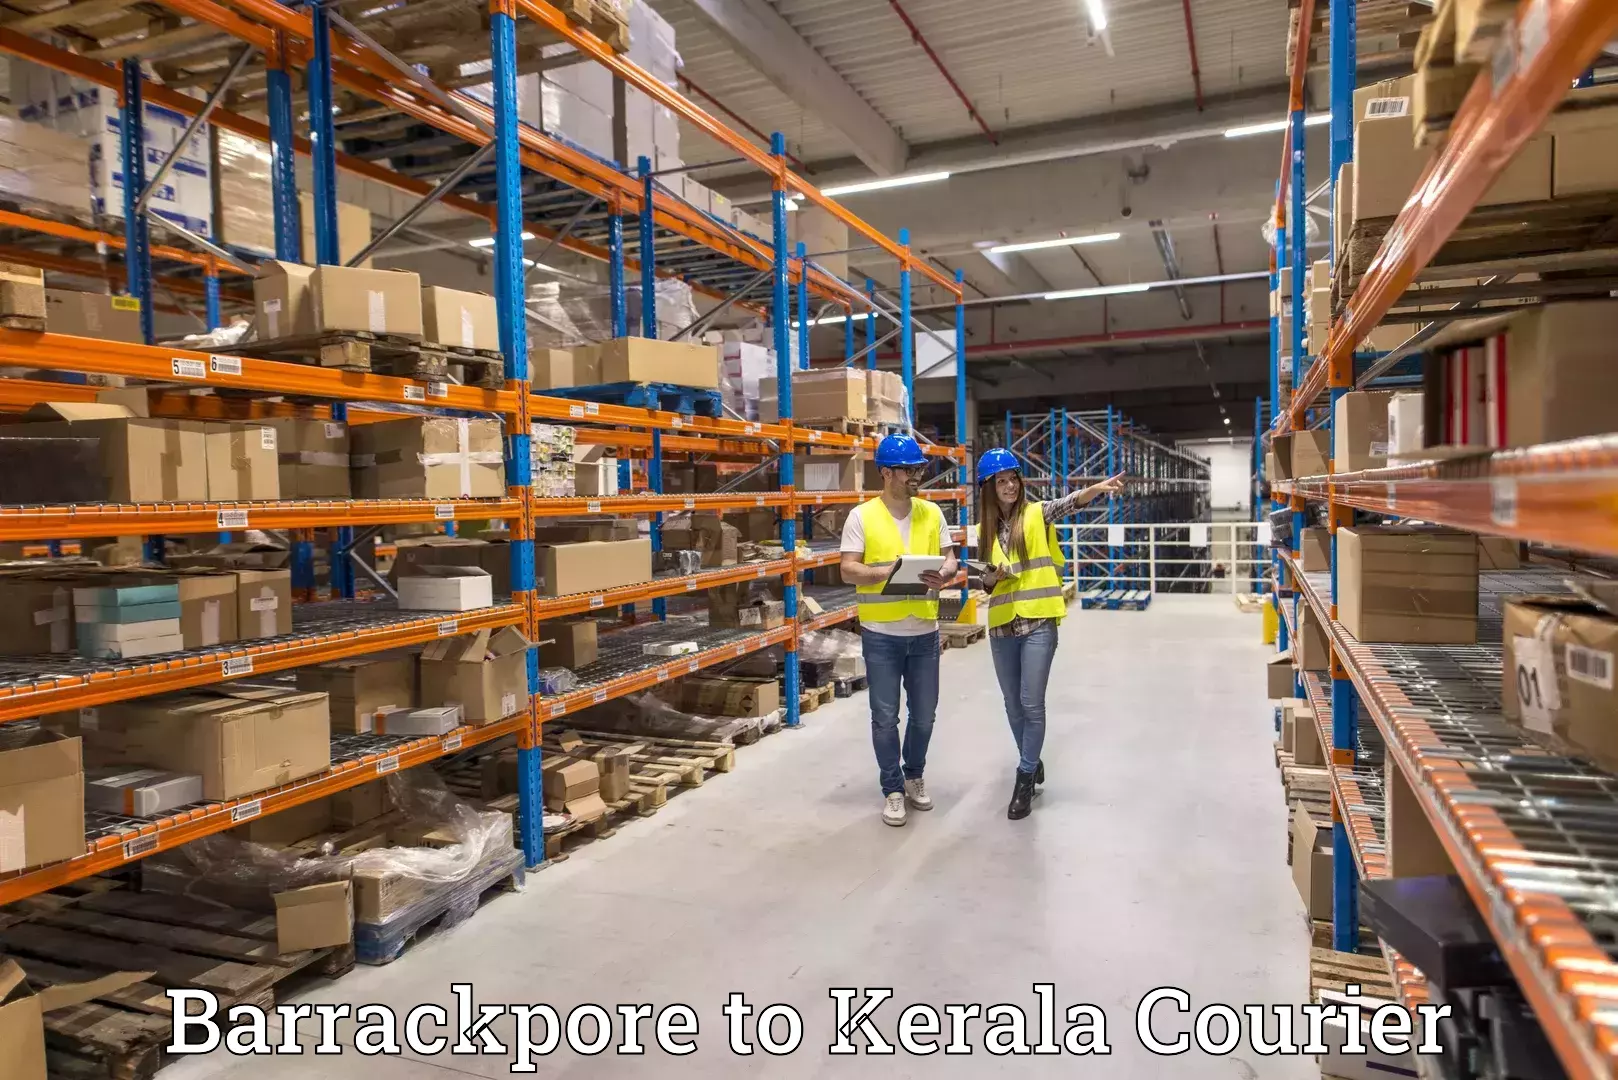 State-of-the-art courier technology Barrackpore to Chavara